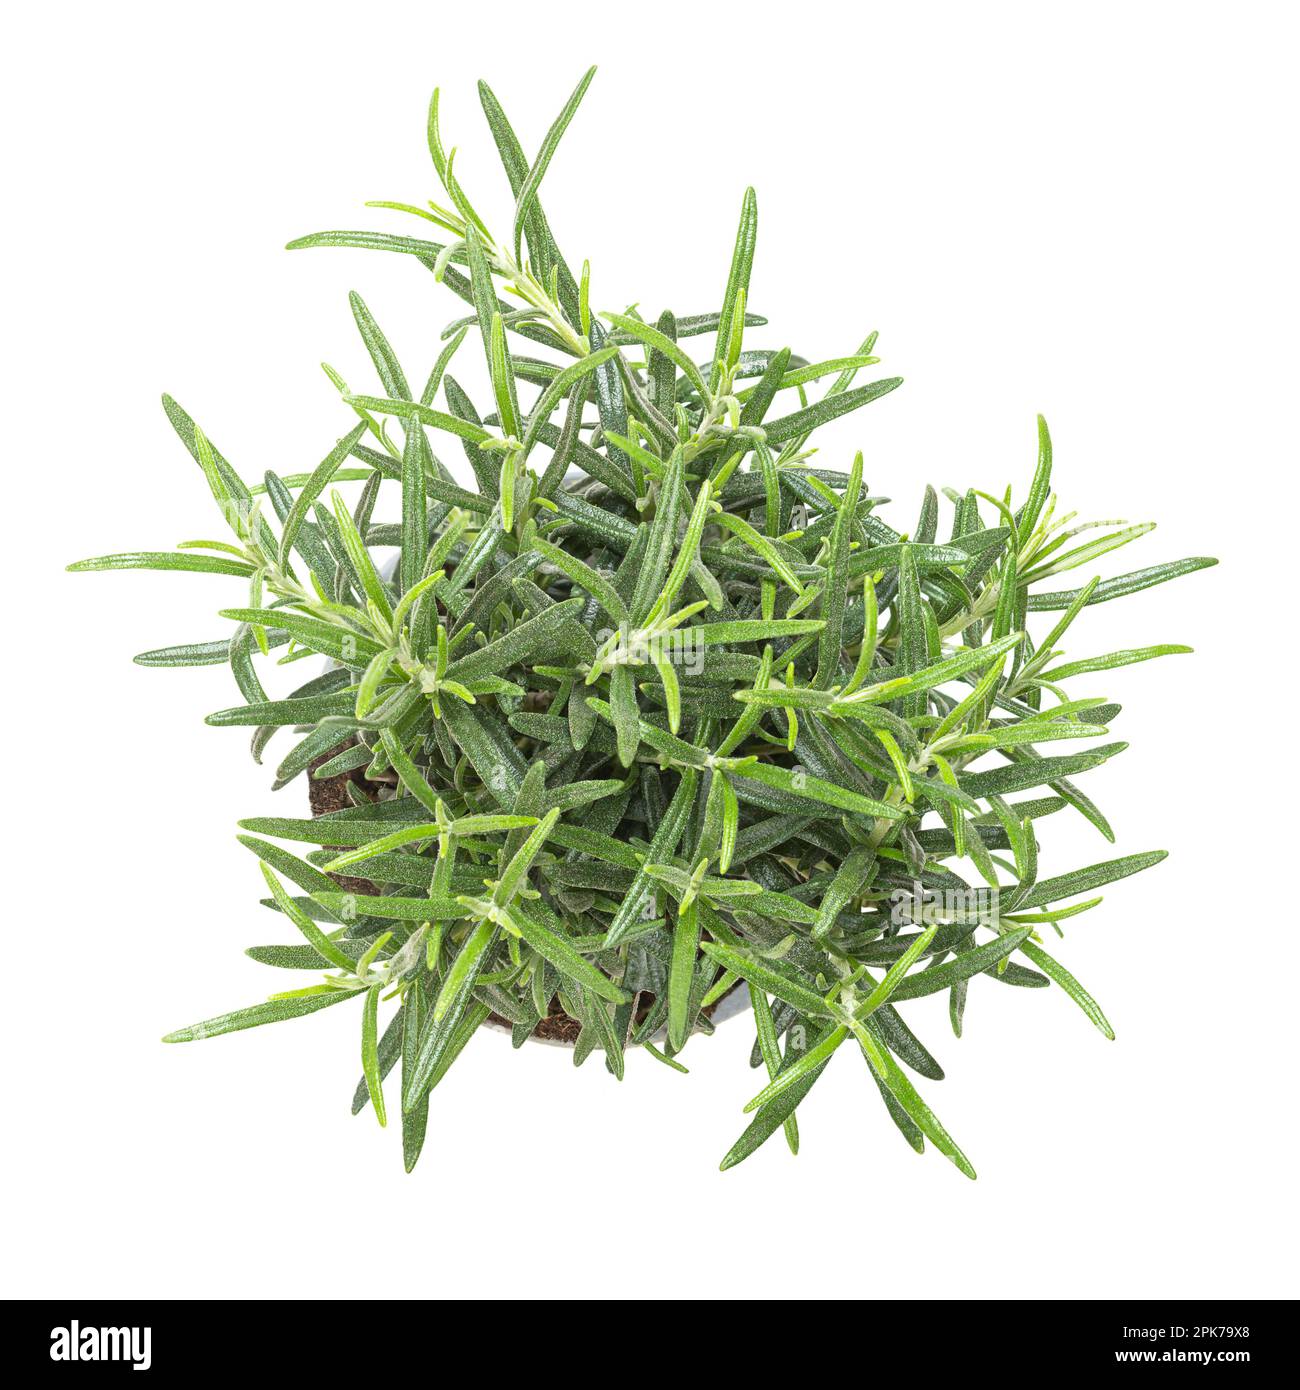 Rosemary, young plant in gray plastic pot. Salvia rosmarinus, aromatic and evergreen shrub with fragrant needle-like green leaves. Stock Photo